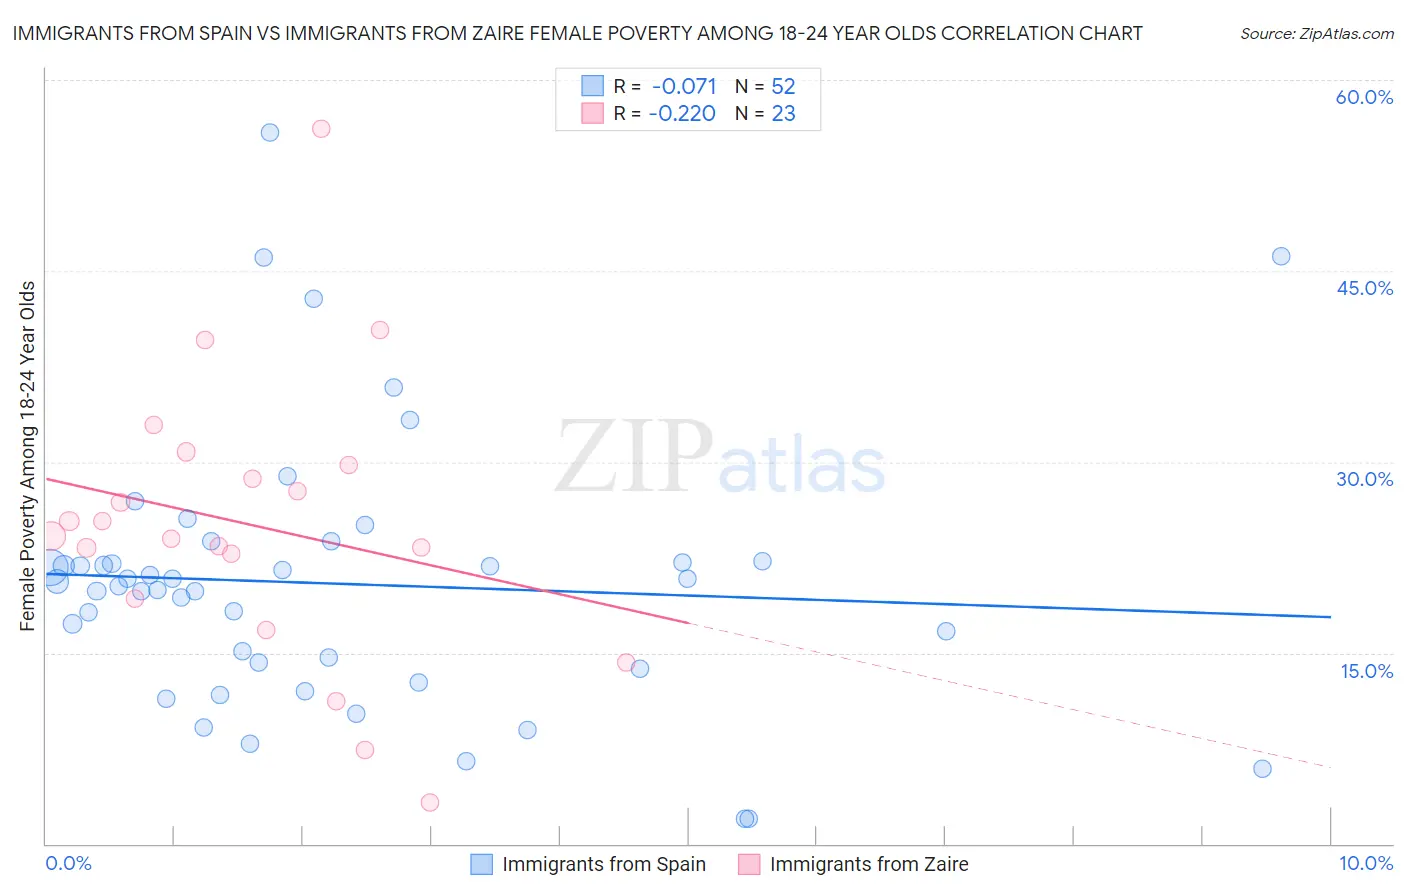 Immigrants from Spain vs Immigrants from Zaire Female Poverty Among 18-24 Year Olds